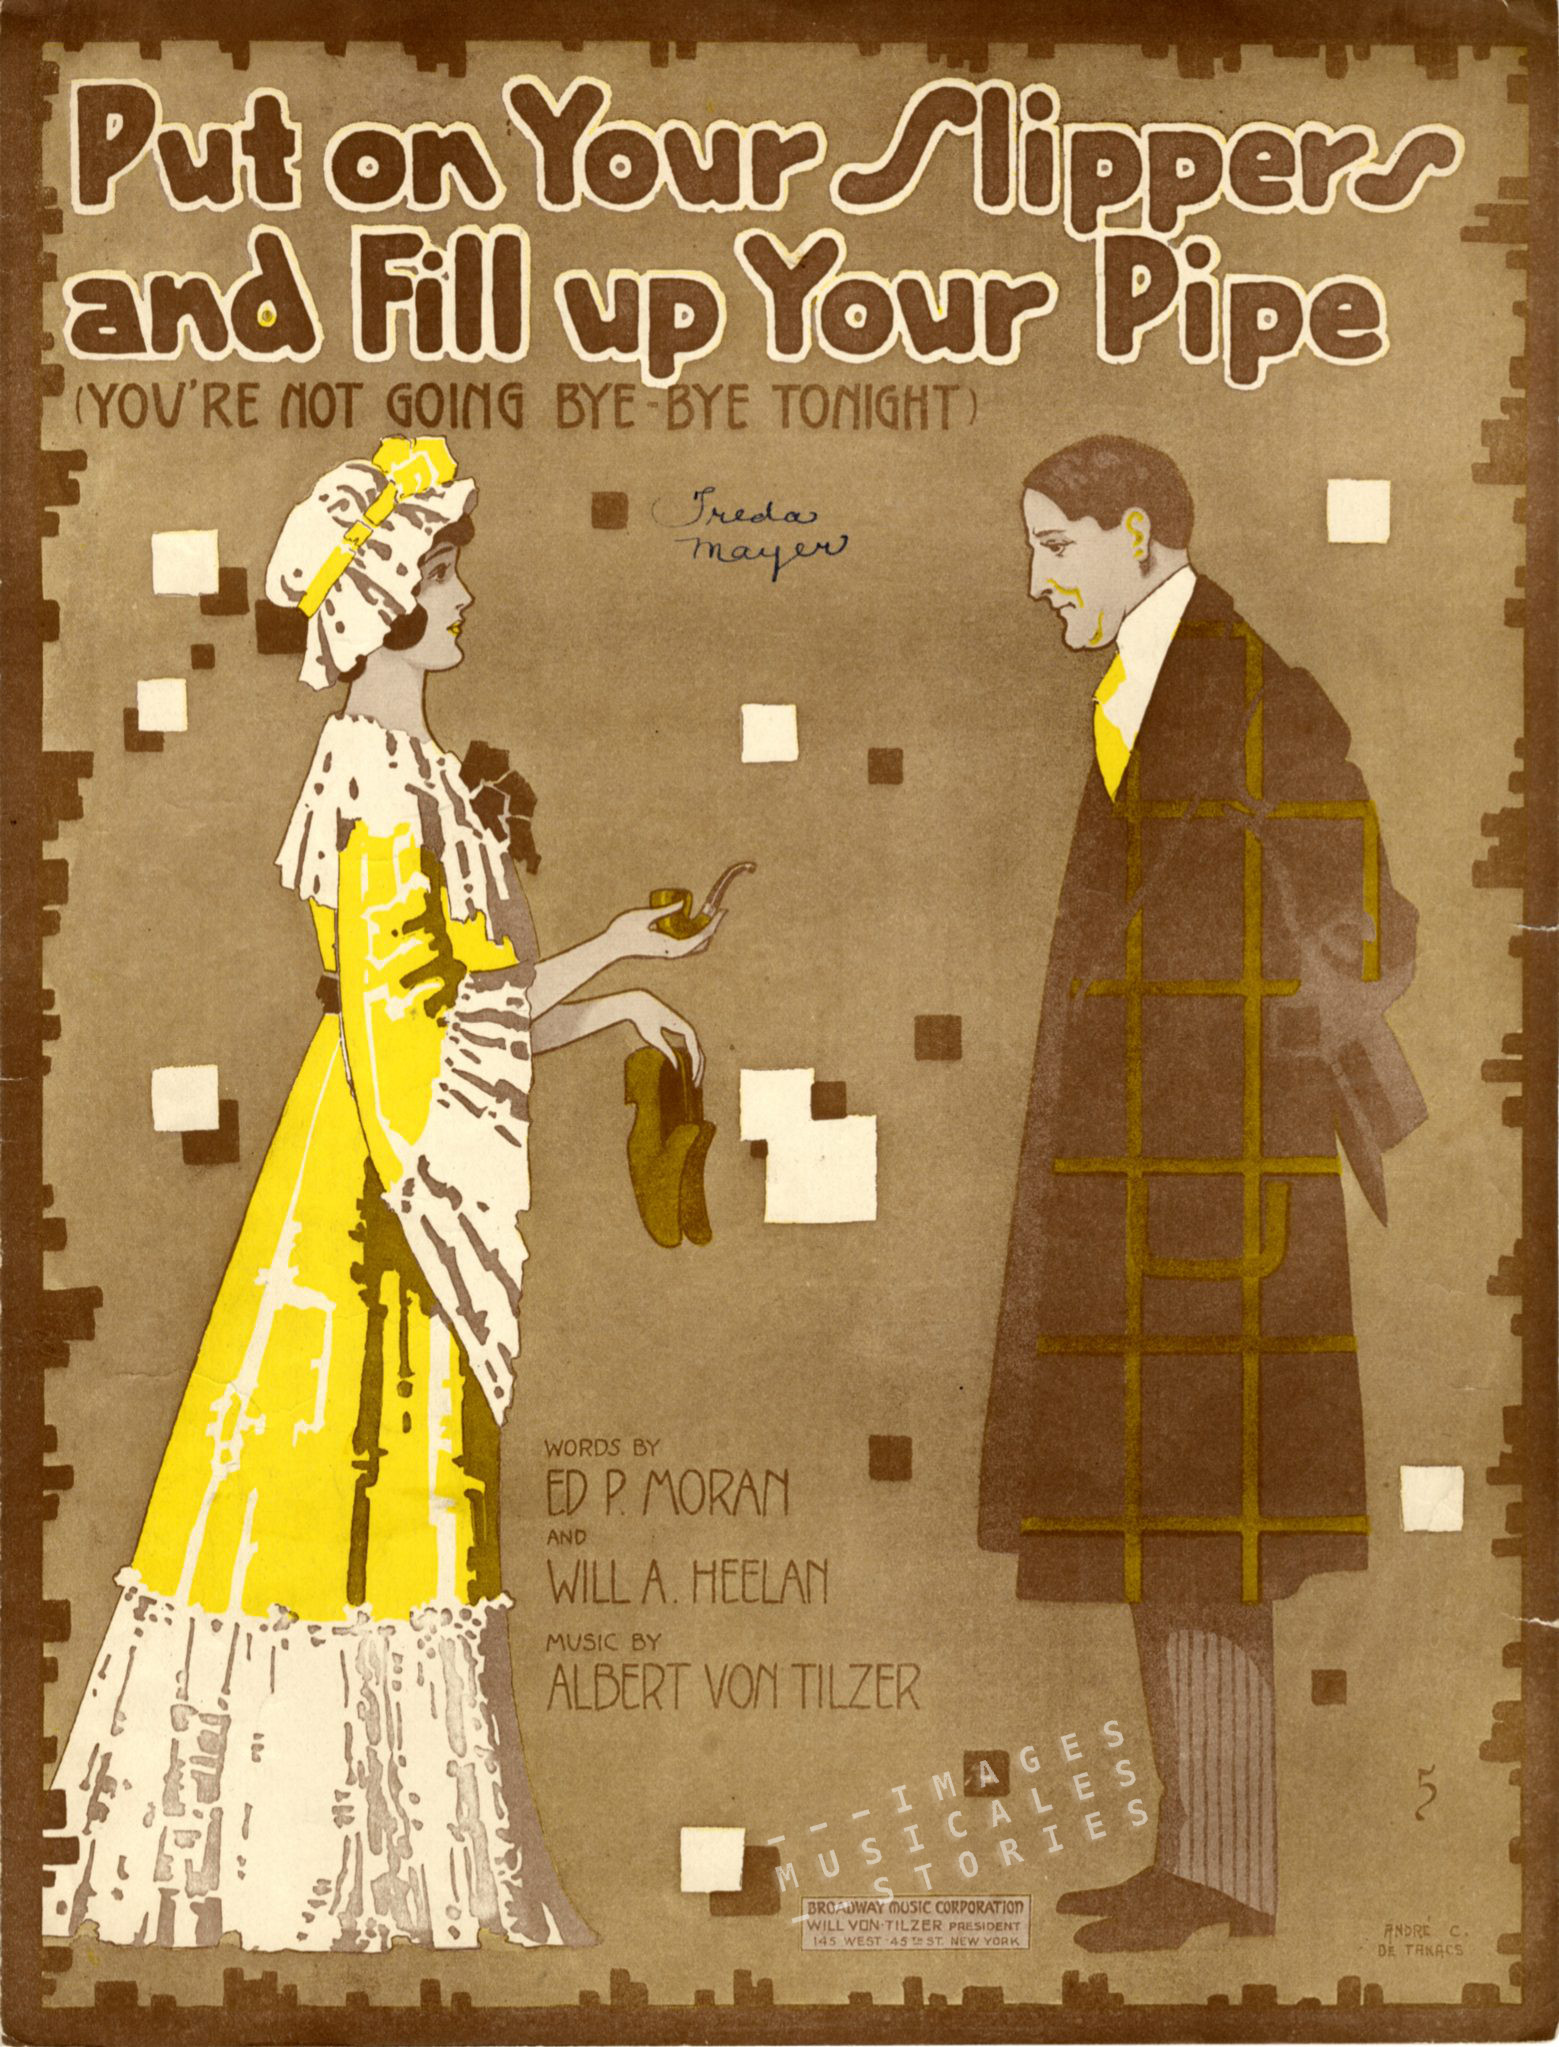 Sheet music cover for 'Put On Your Slippers and Fill Up Your Pipe'